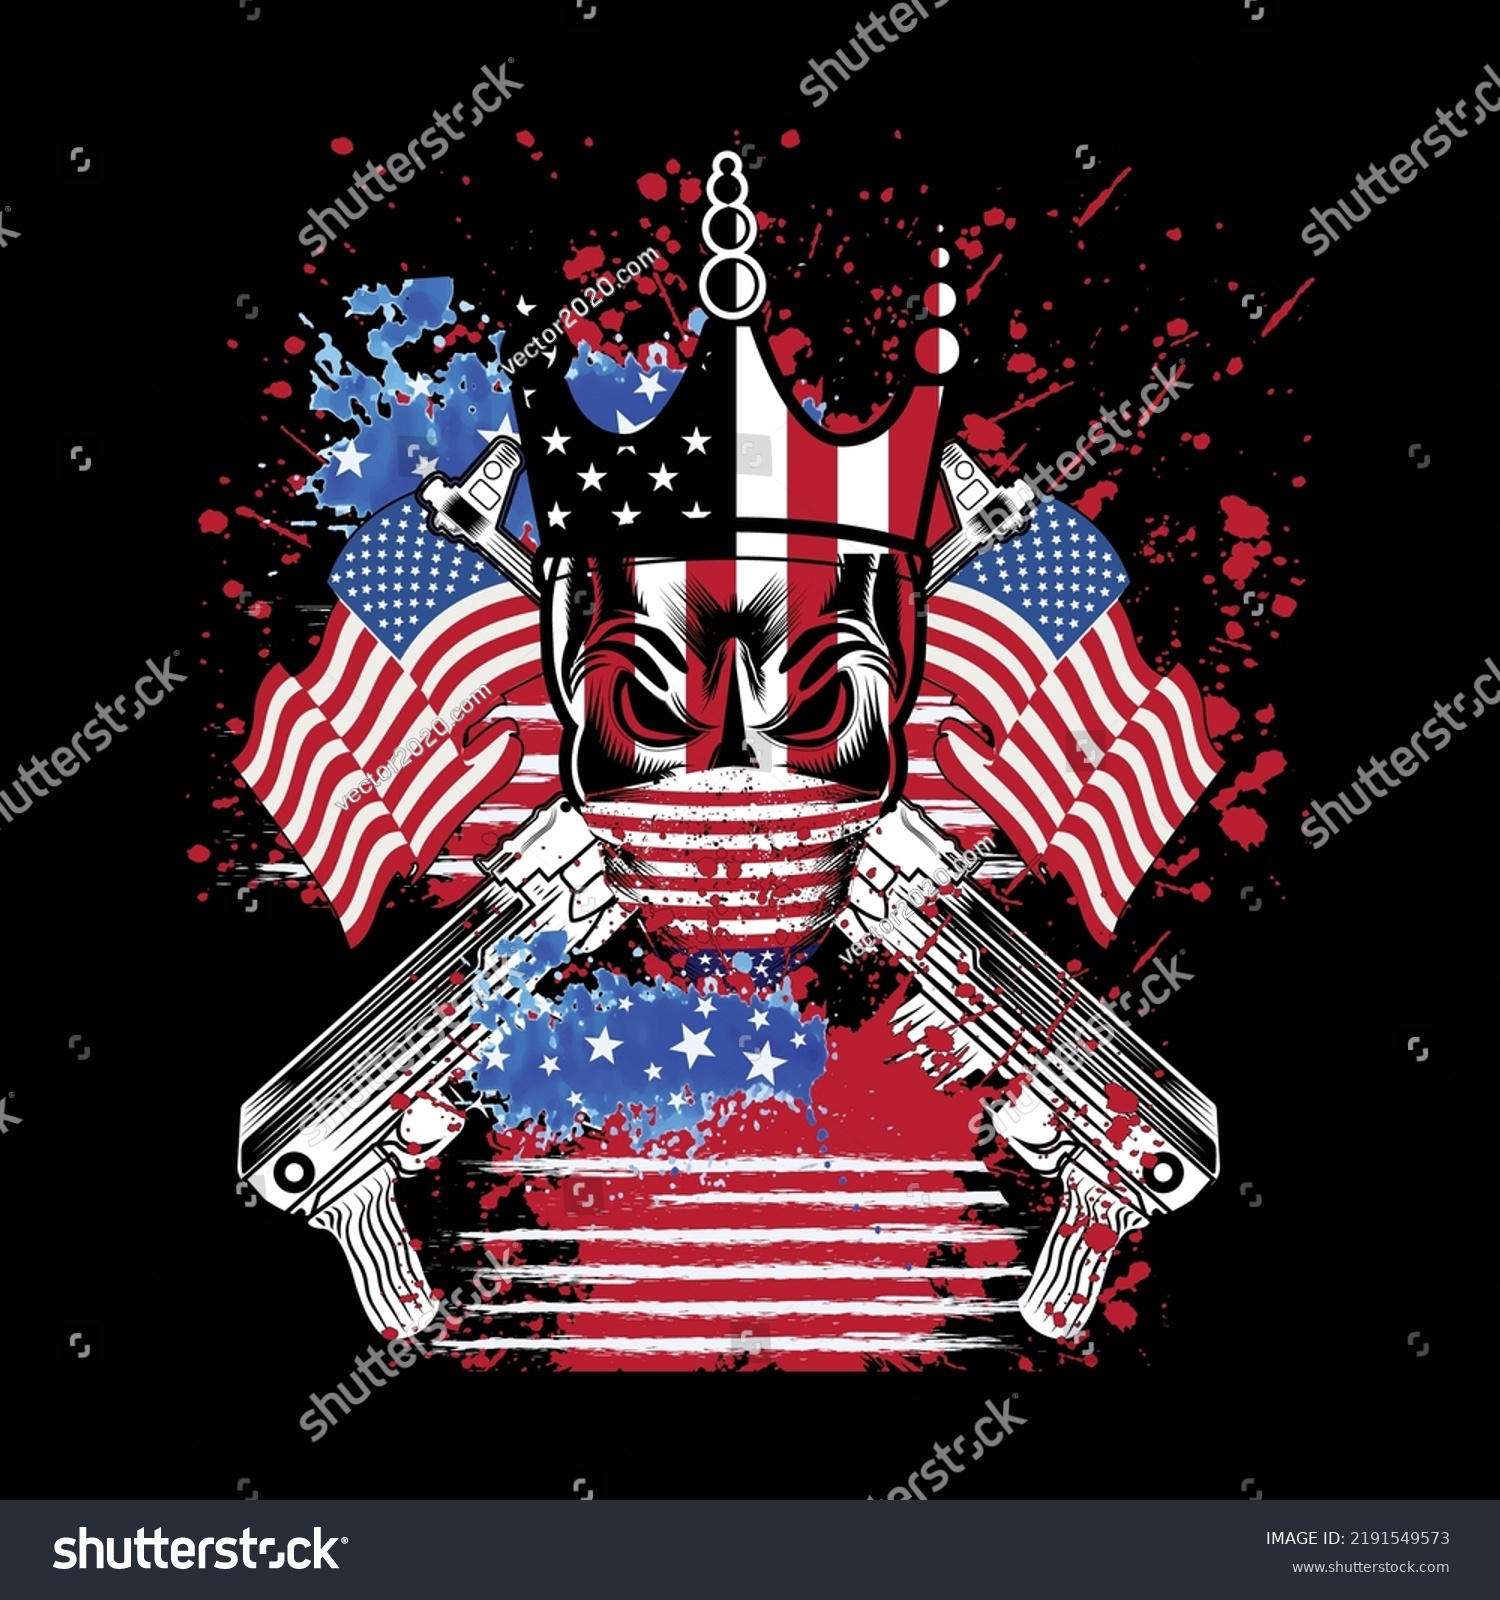 SVG of American Flag With skull Design T-shirt design, With This Instant Download, Which Includes: - Eps file, File Size : 2500 X 2500 Pixels. svg